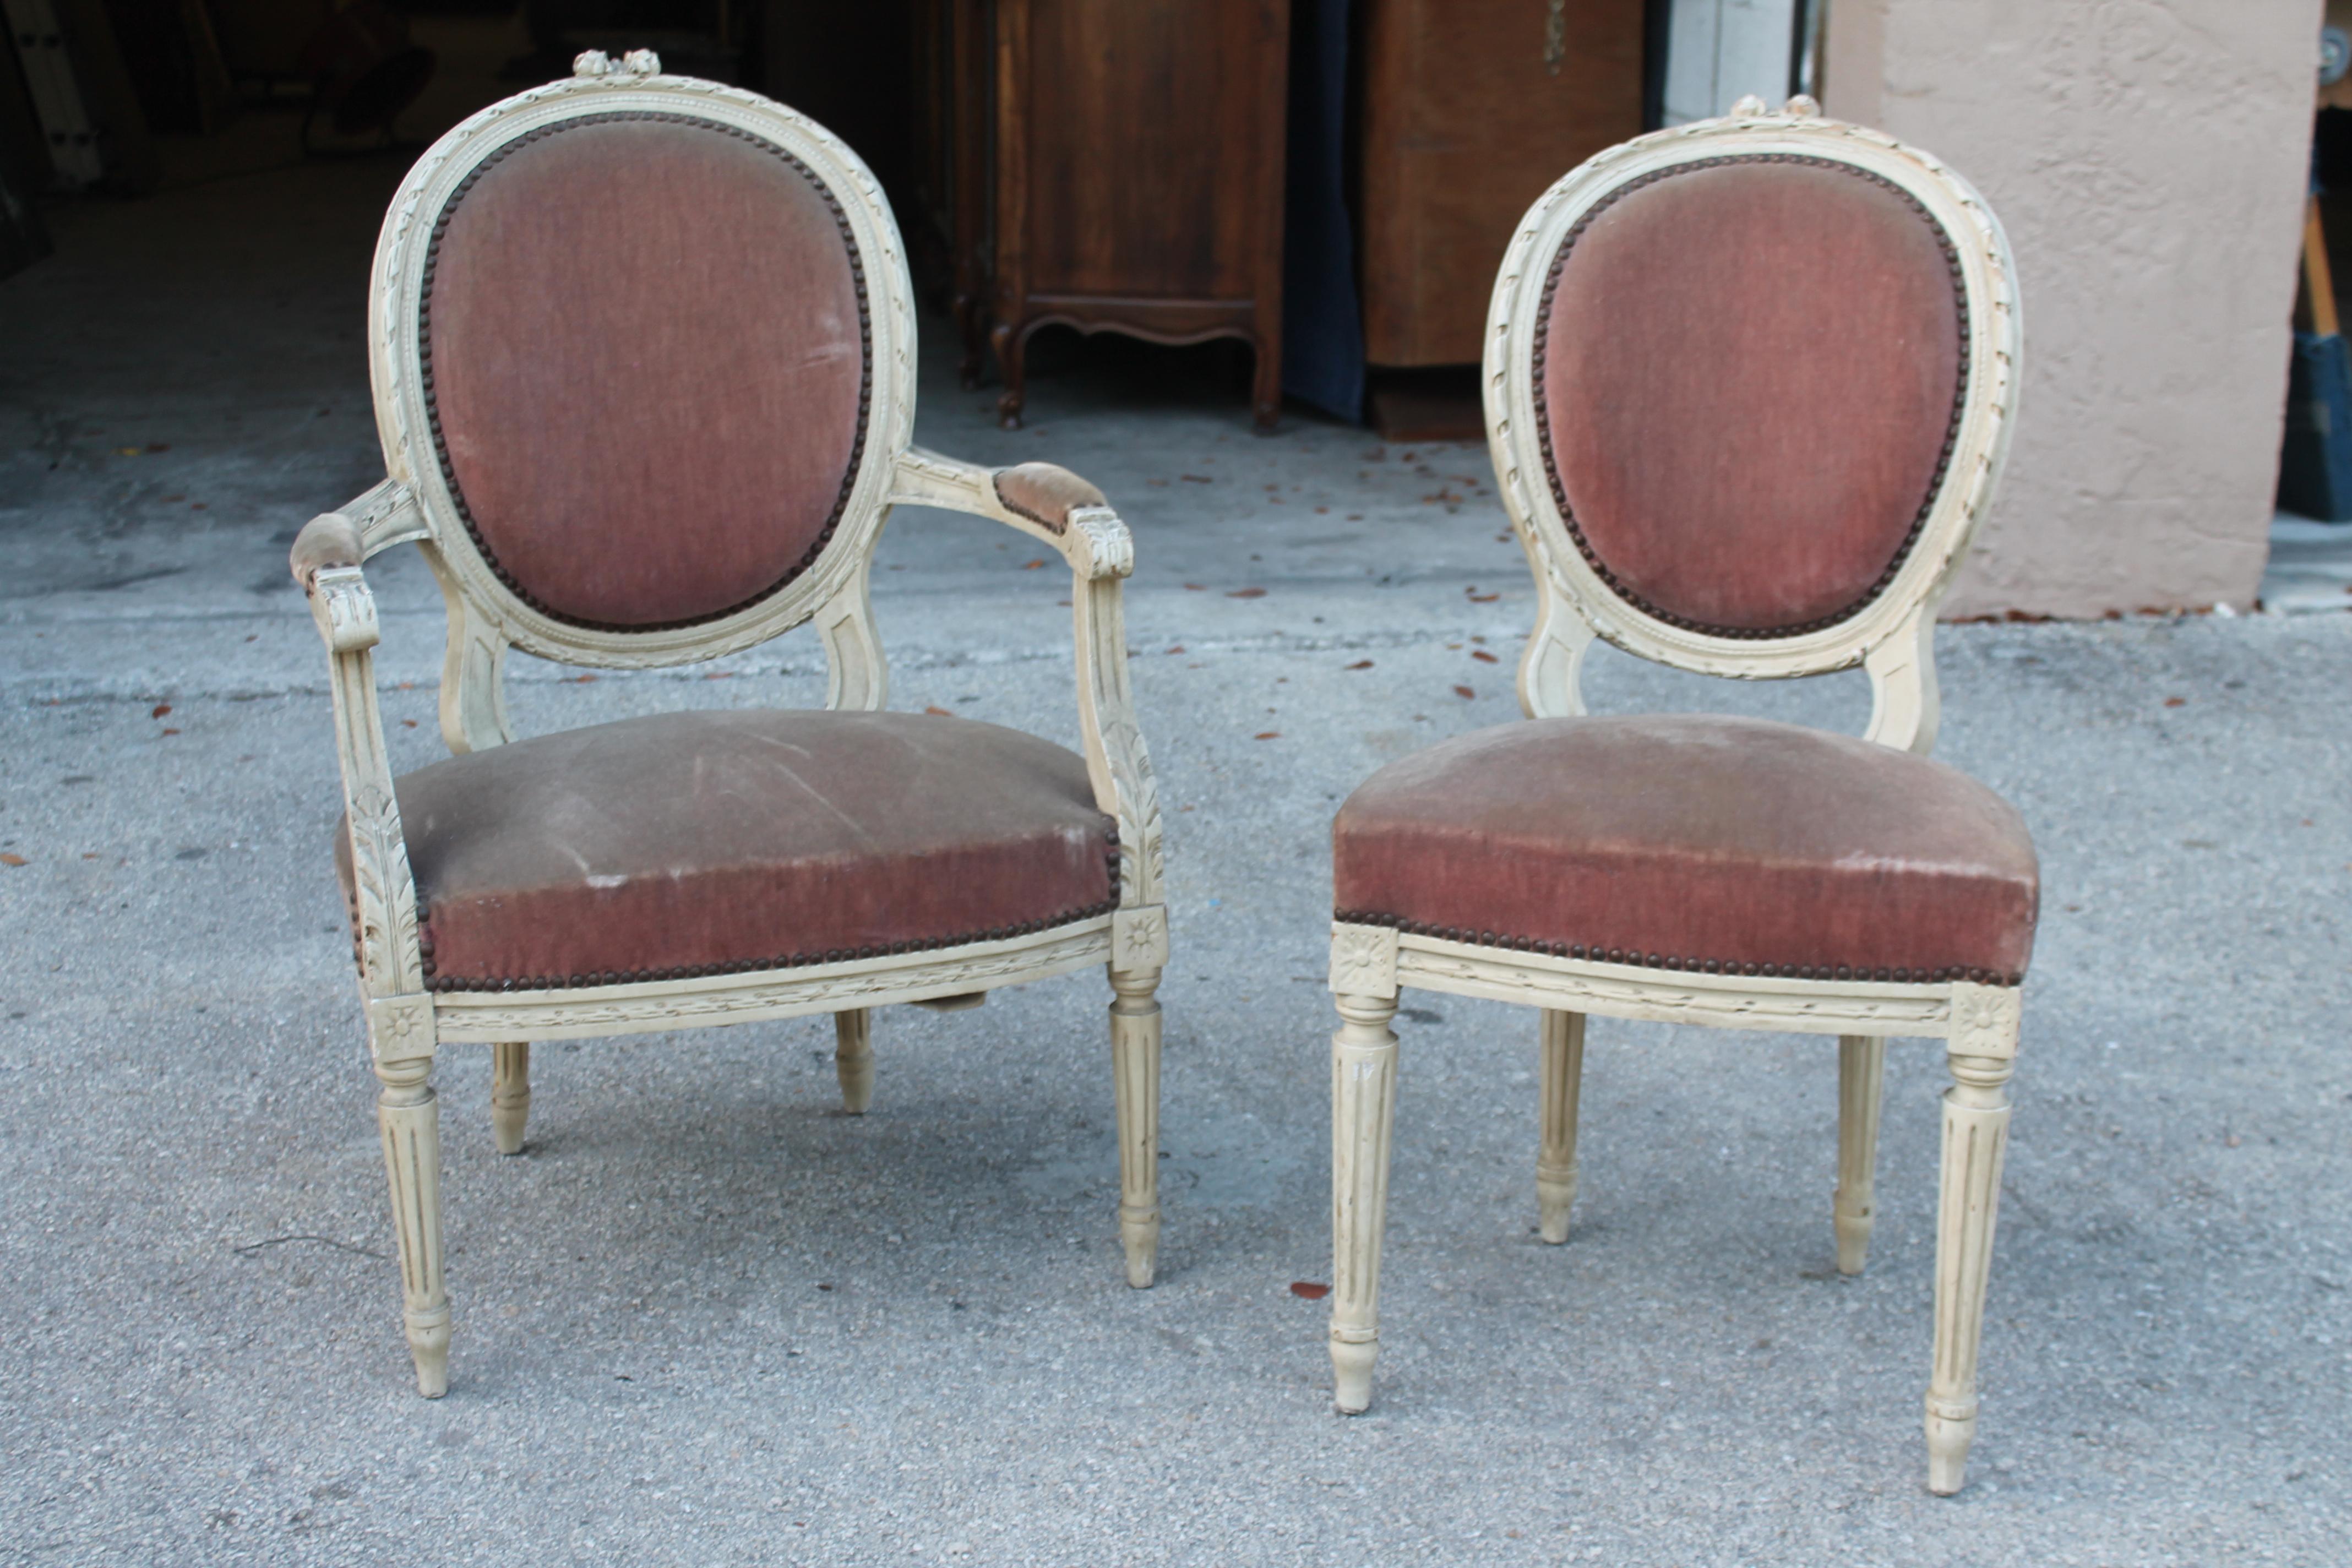  19thc French Louis XVI Arm Chair and Side Chair [2 piece] For Sale 5